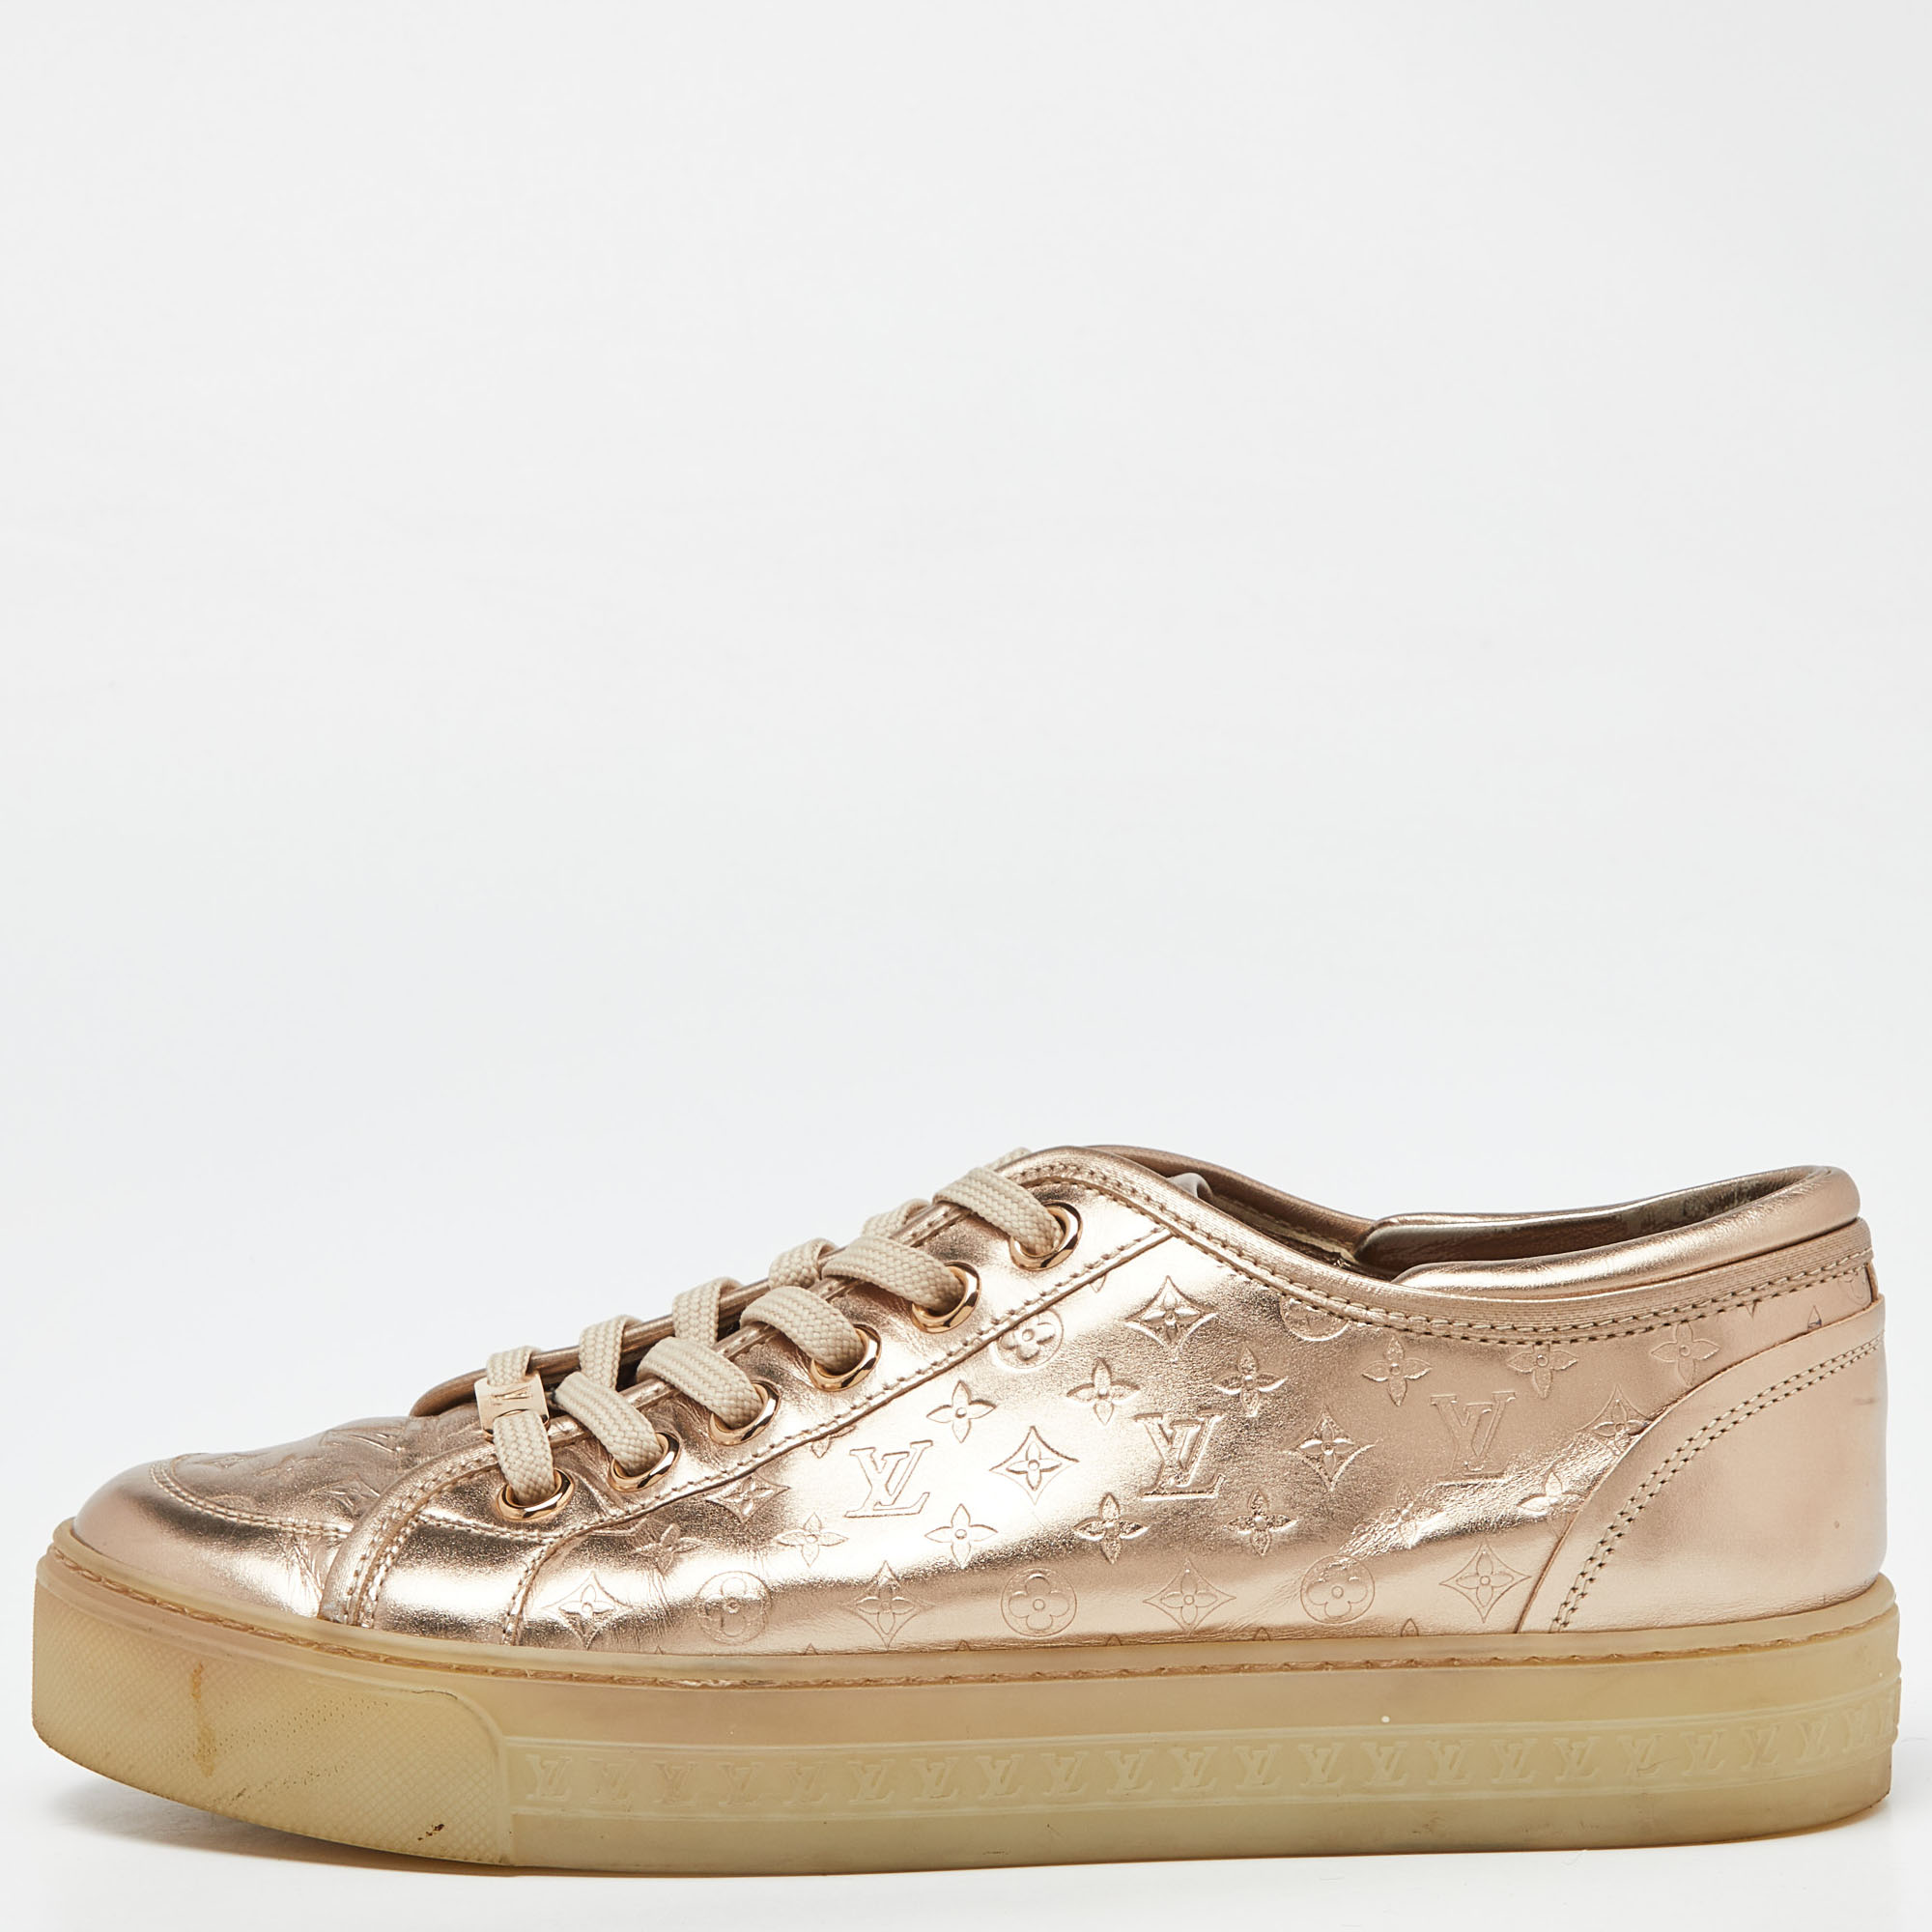 Give your outfit a luxe update with this pair of designer sneakers. The Louis Vuitton shoes are sewn perfectly to help you make a statement in them for a long time.